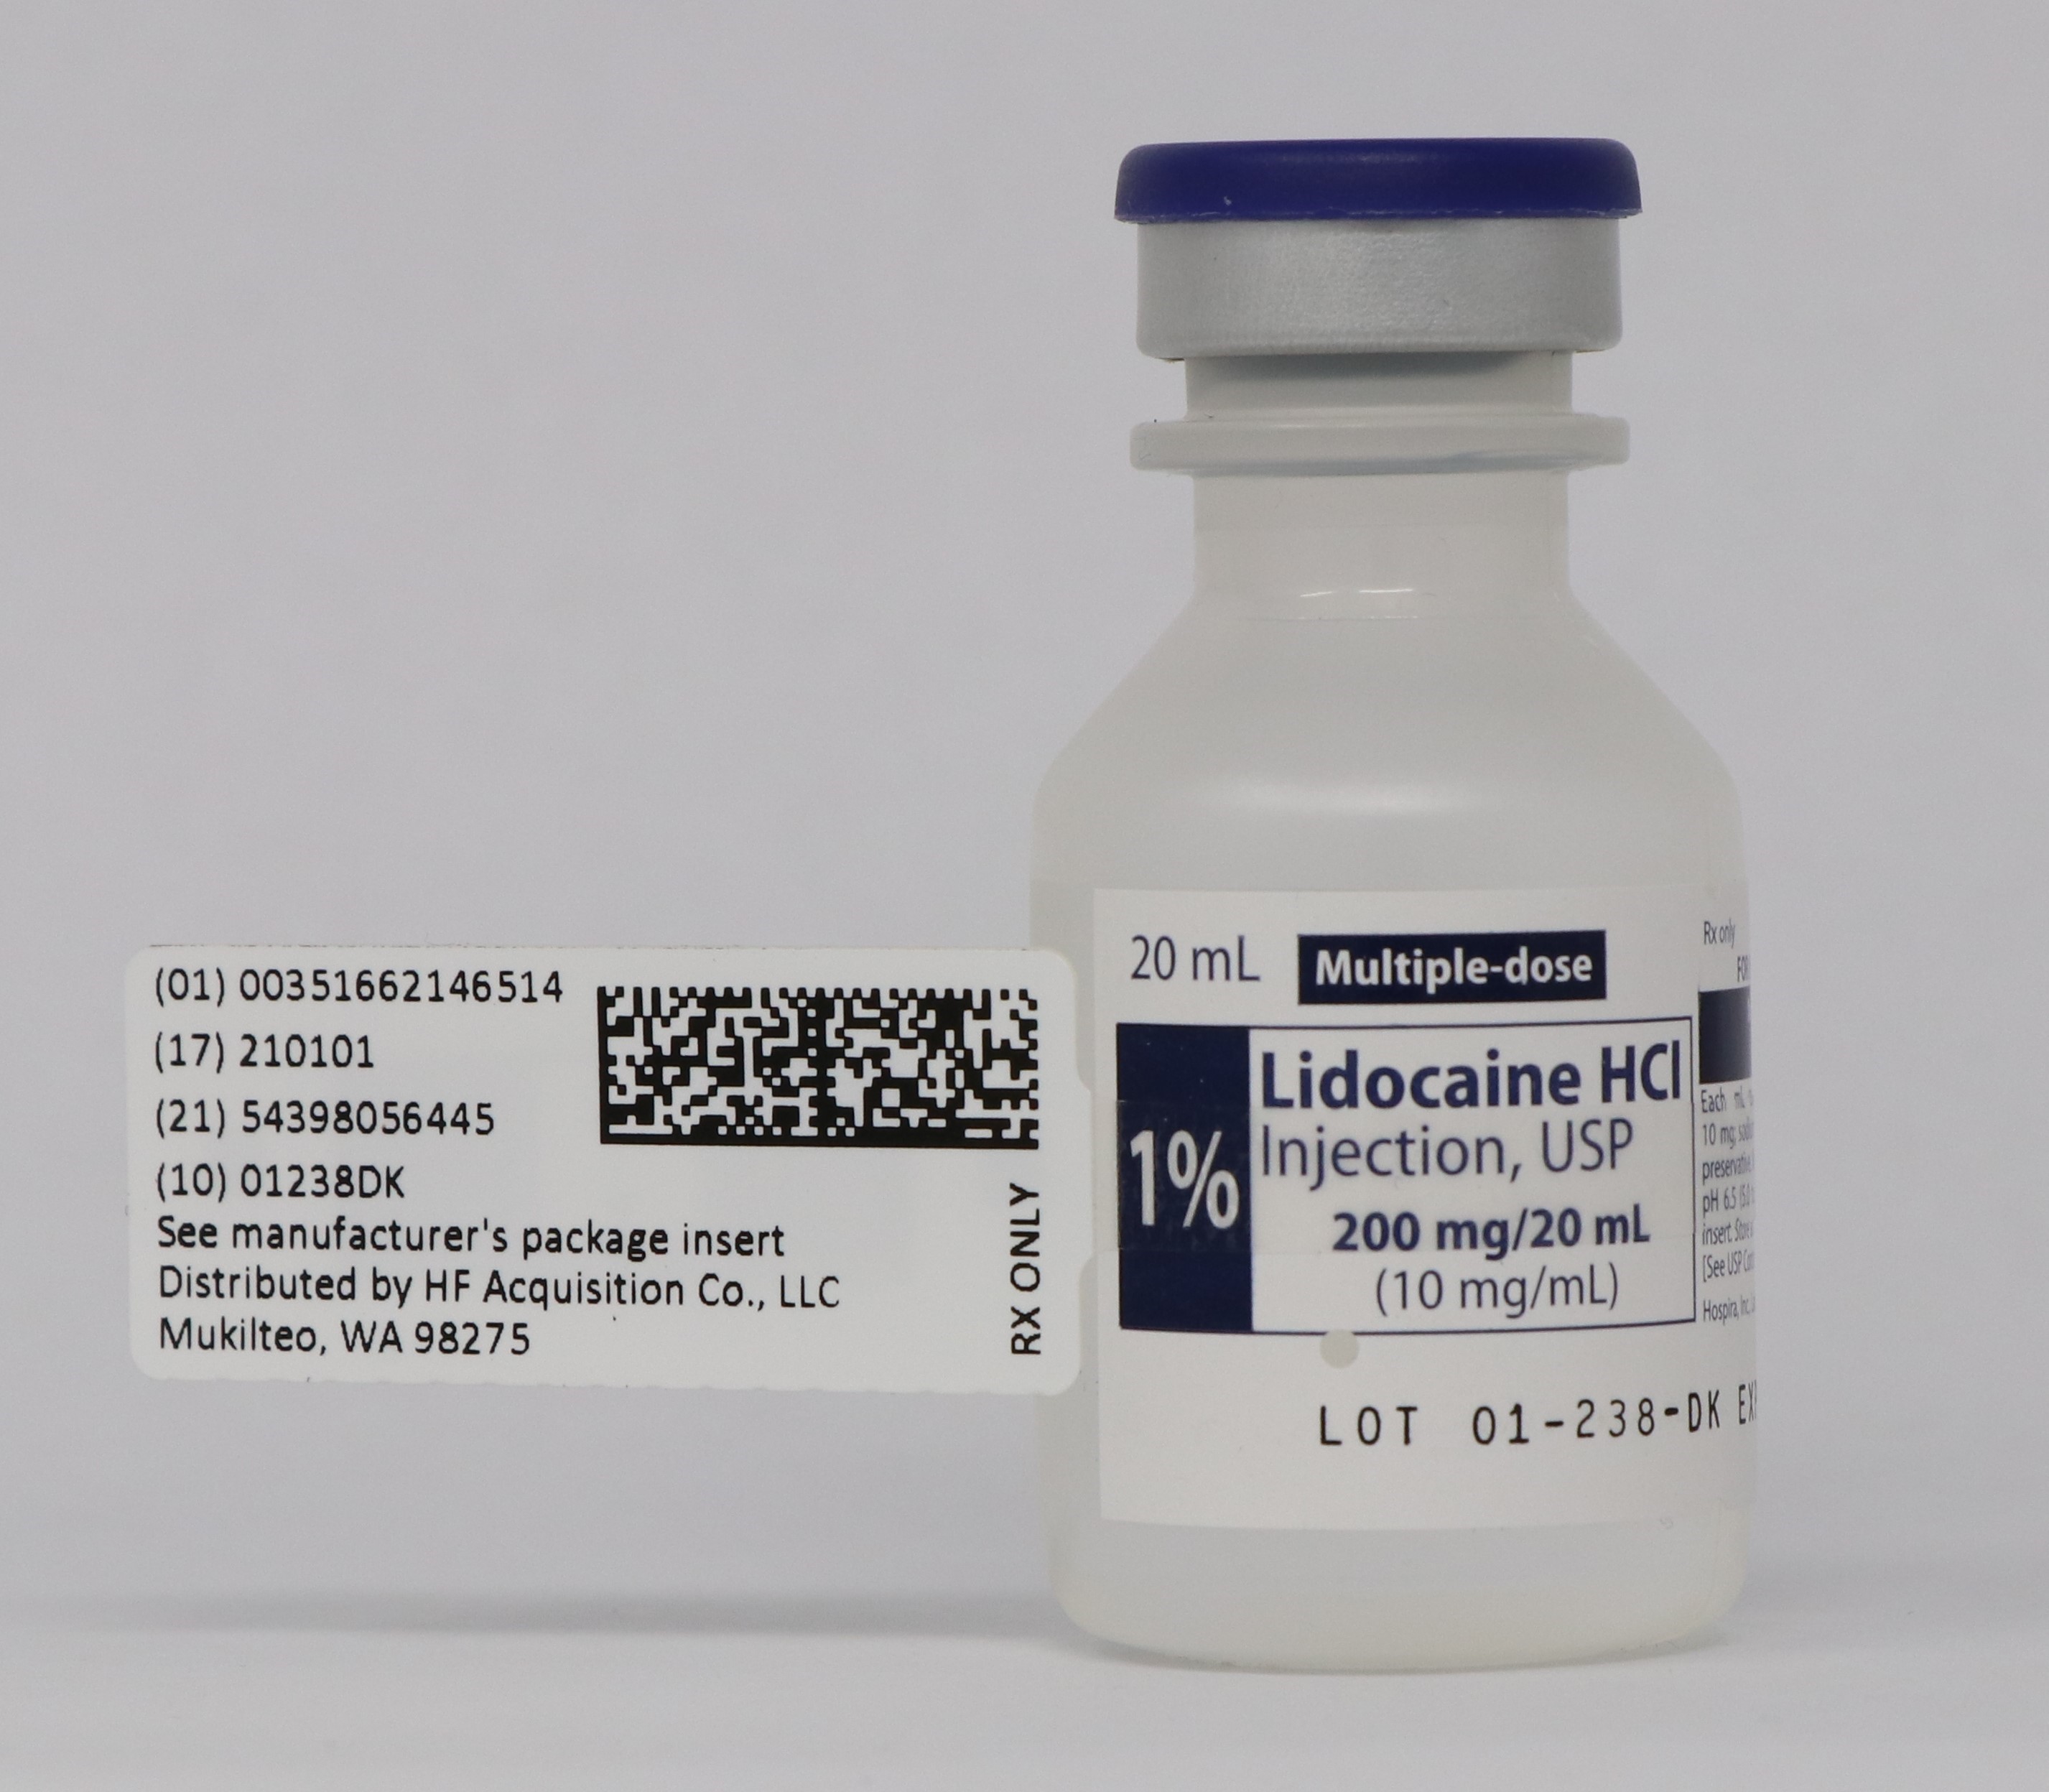 51662-1465-1 SERIALIZED LABELING